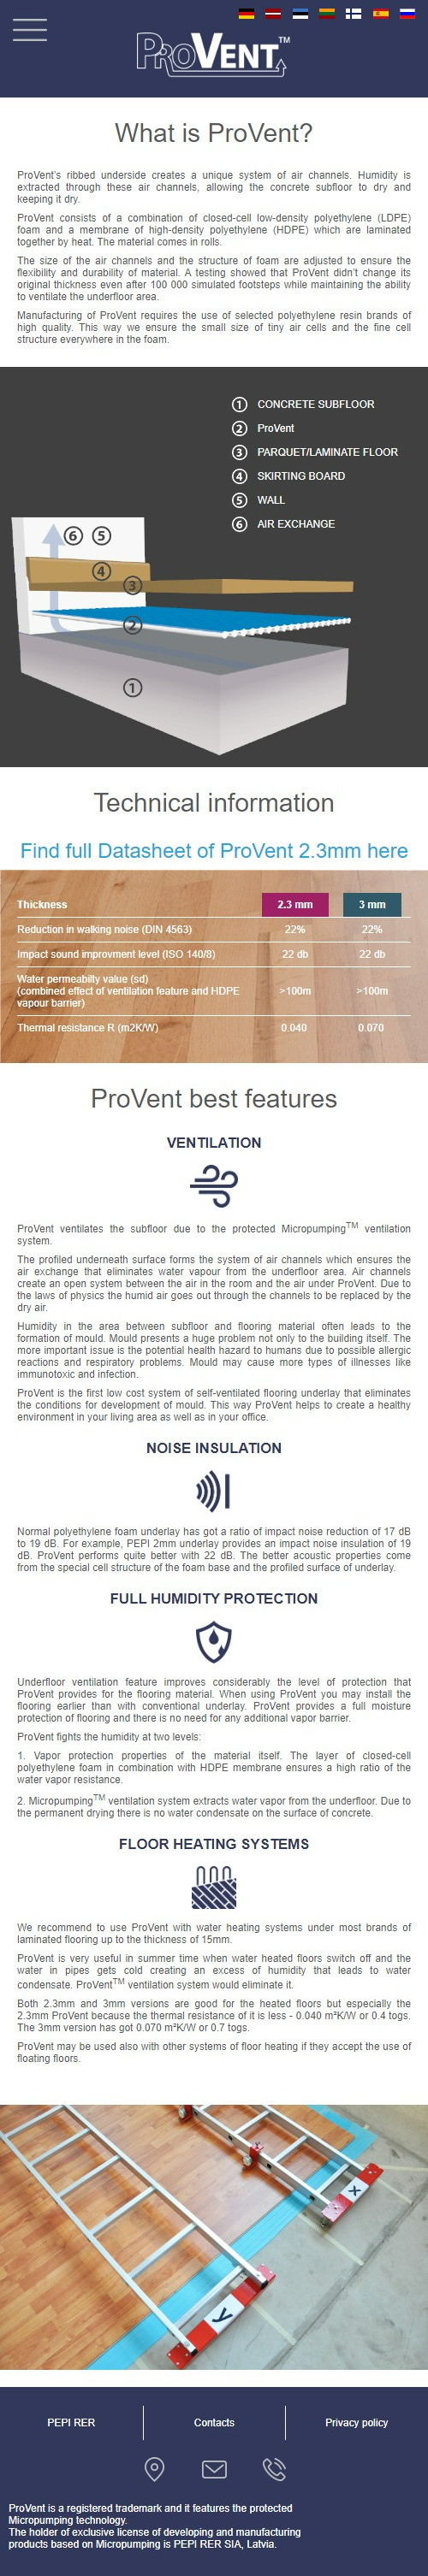 provent mobile technology